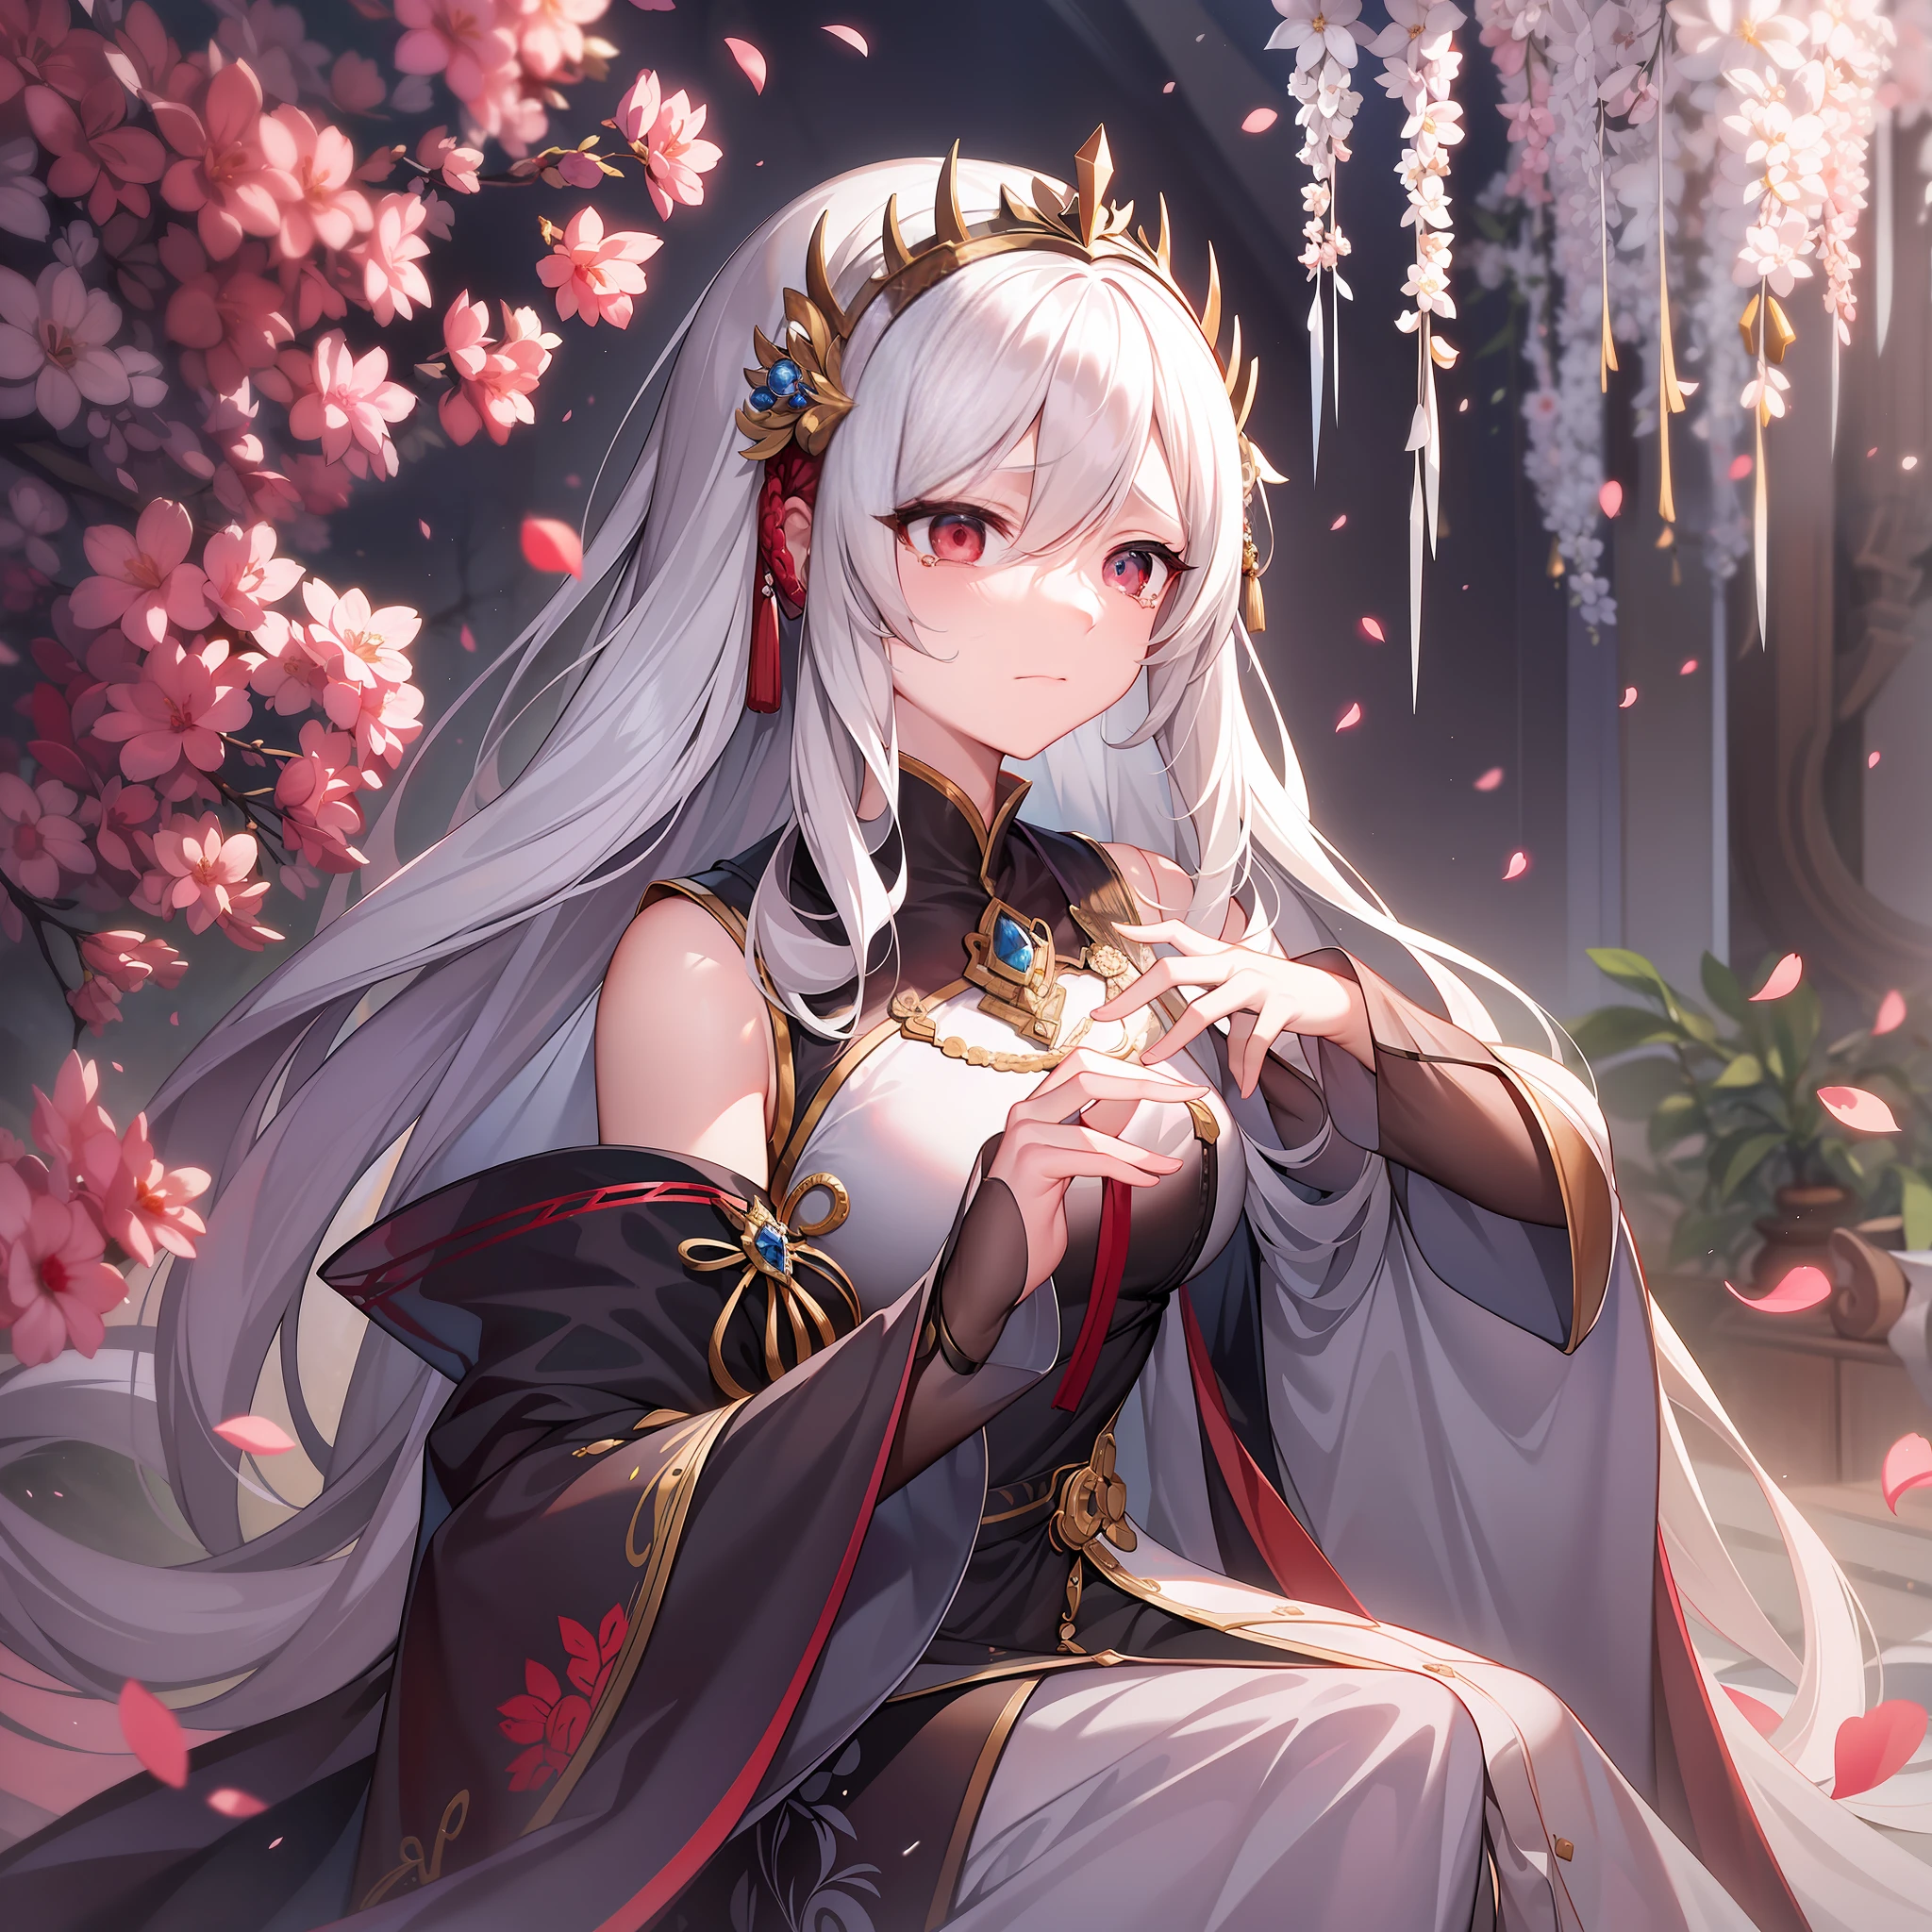 In the midst of this magnificent and ancient court，A white-haired female emperor of the white fox tribe who is wiping her tears appears in the center of the picture。

She wore a gorgeous white dress，Hair and drooping long sleeves dance softly in the wind。But her face was covered with tears，His eyes were filled with sadness and despair。She held a piece of paper in her hand，The contents of the paper made her feel endless grief。

The color tone of the whole picture is mainly white and deep red，The strong contrast creates a solemn atmosphere。In the background is a stately palace，A faint light shone through the crimson windows。

This female emperor through her expressions and body language，It shows a fragile and sad heart。She was waving the paper in her hand，Tears couldn't help themselves from slipping down。Her eyes were confused，It seems to be silently reminiscing about something，The words written on the piece of paper in front of her brought her endless pain。

The whole picture conveys a sense of heaviness、Sadness of emotion，Let the viewer feel the endless grief and helplessness that the female emperor has lost something。With the nobility shown before、The solemn image is different，This painting shows the psychological stress and tossing and turning sleep of those in power in the face of irresistible choices and failures。